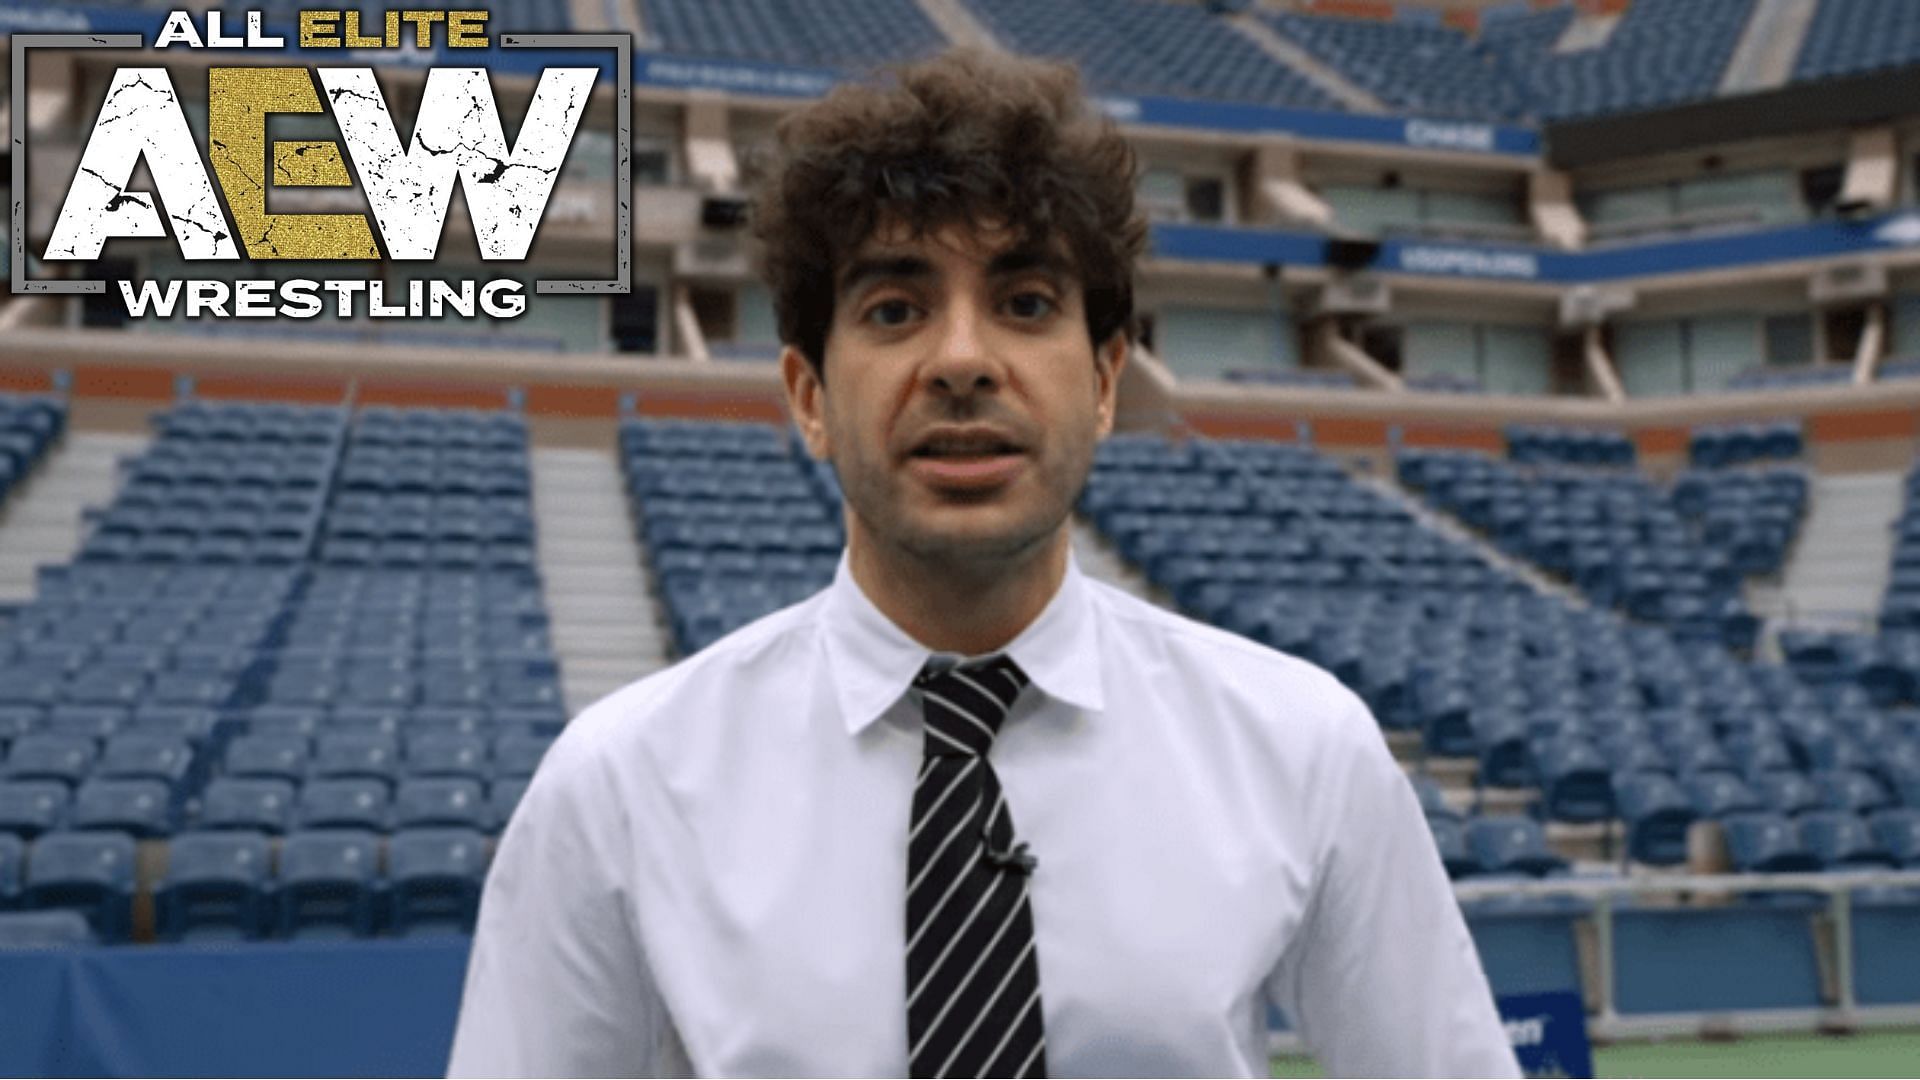 Tony Khan has acquired some of the most talented wrestlers in the industry.